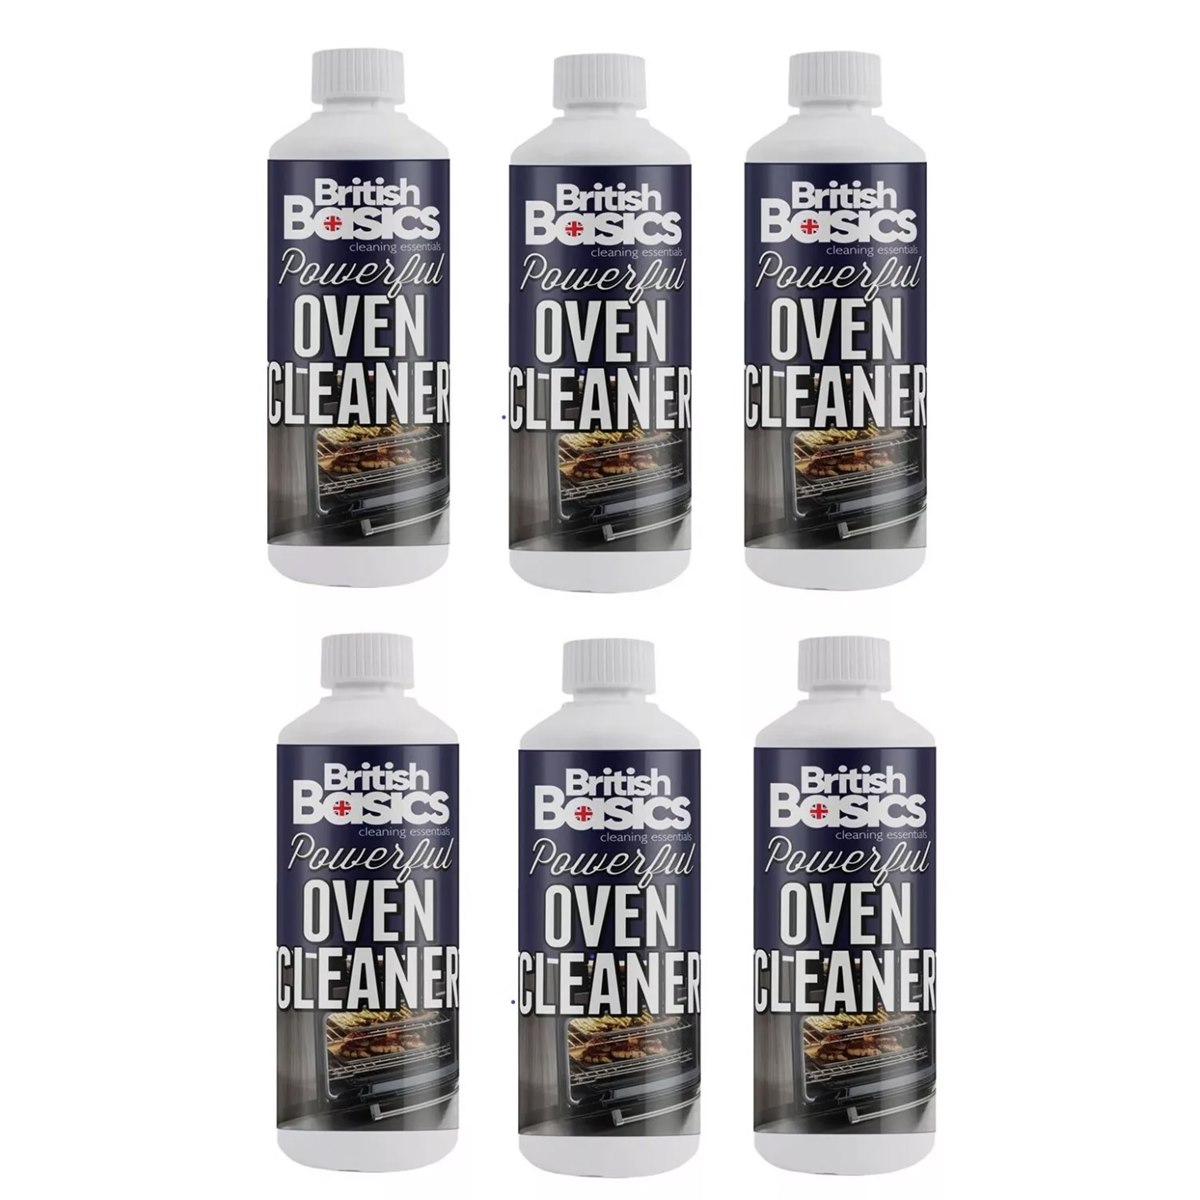 Case of 6 x British Basics Powerful Oven Cleaner 500ml